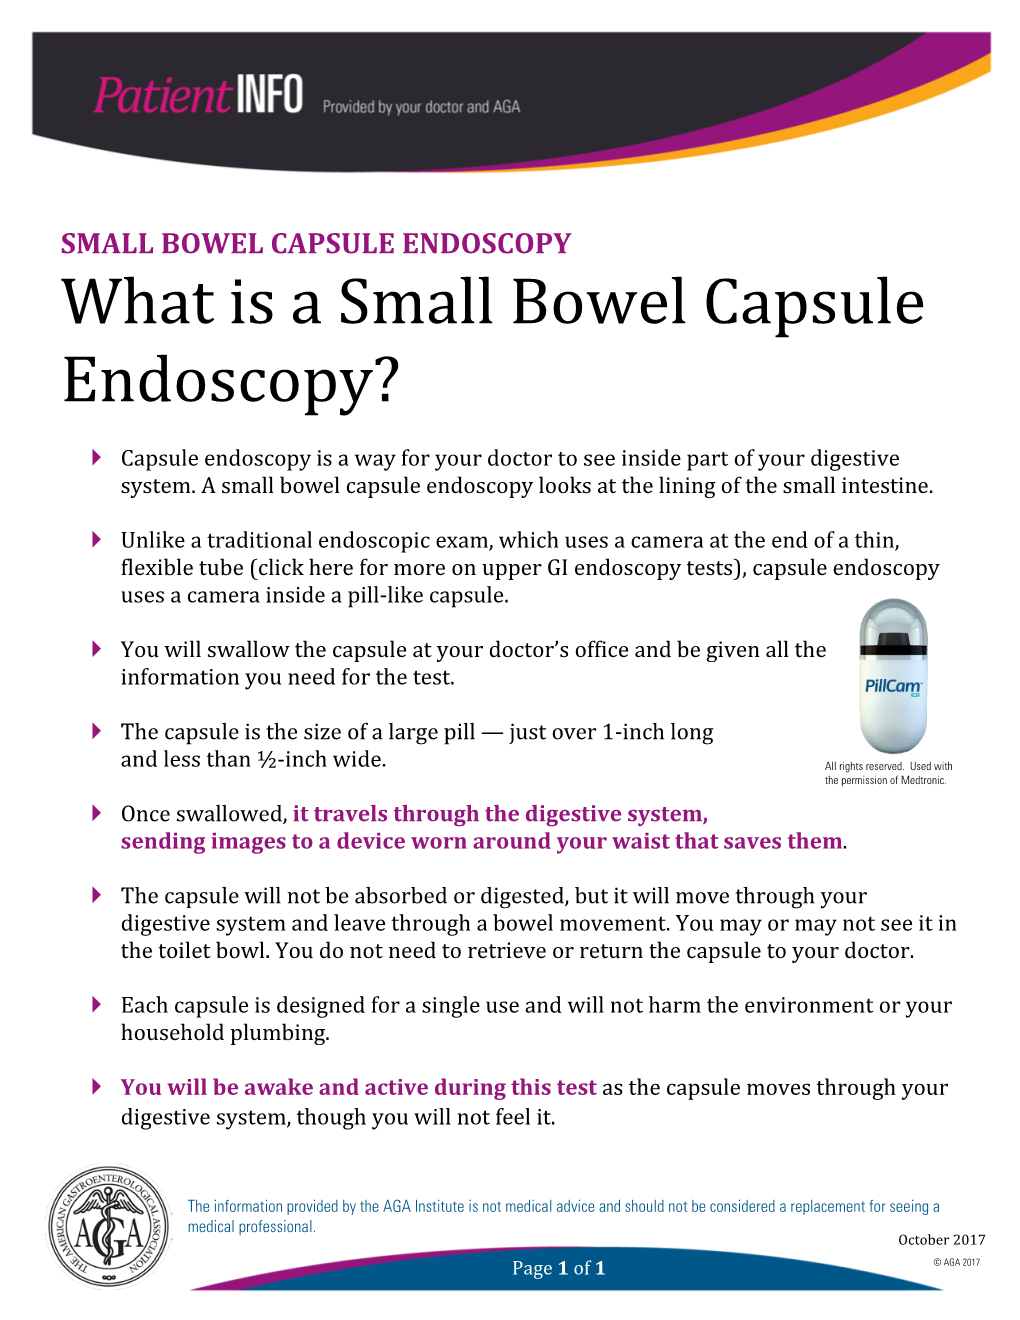 What Is a Small Bowel Capsule Endoscopy?